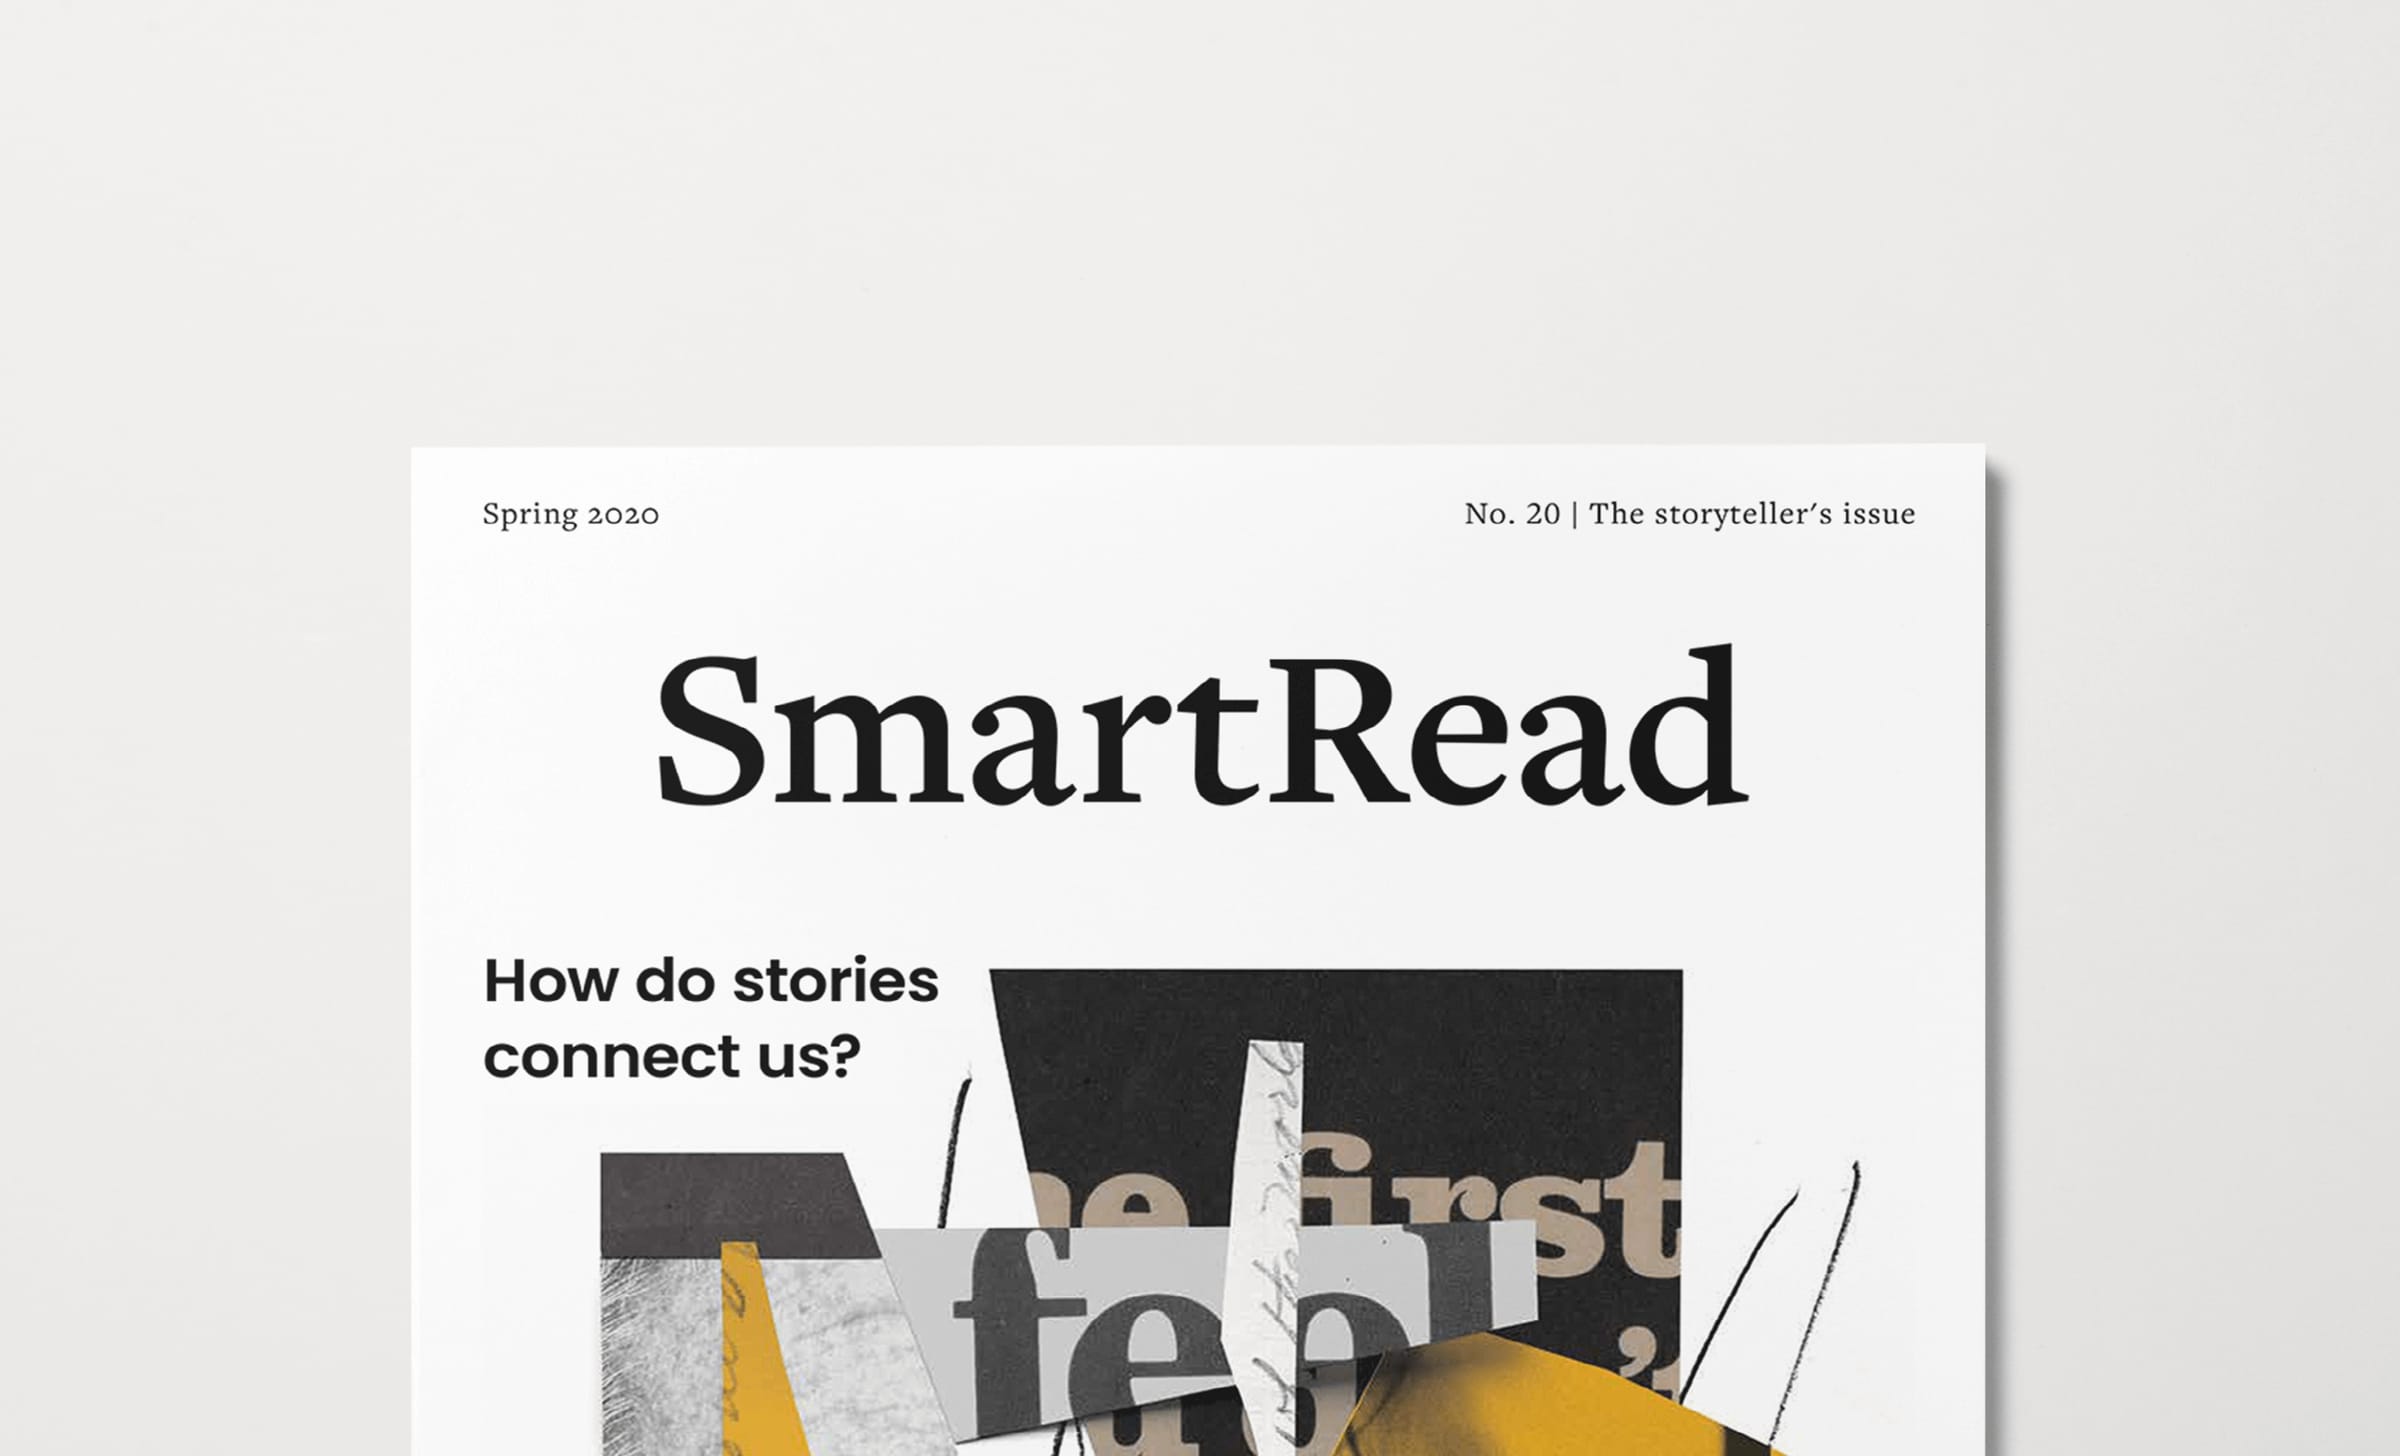 The storytellers SmartRead magazine cover showing different words cut from magazines overlapping